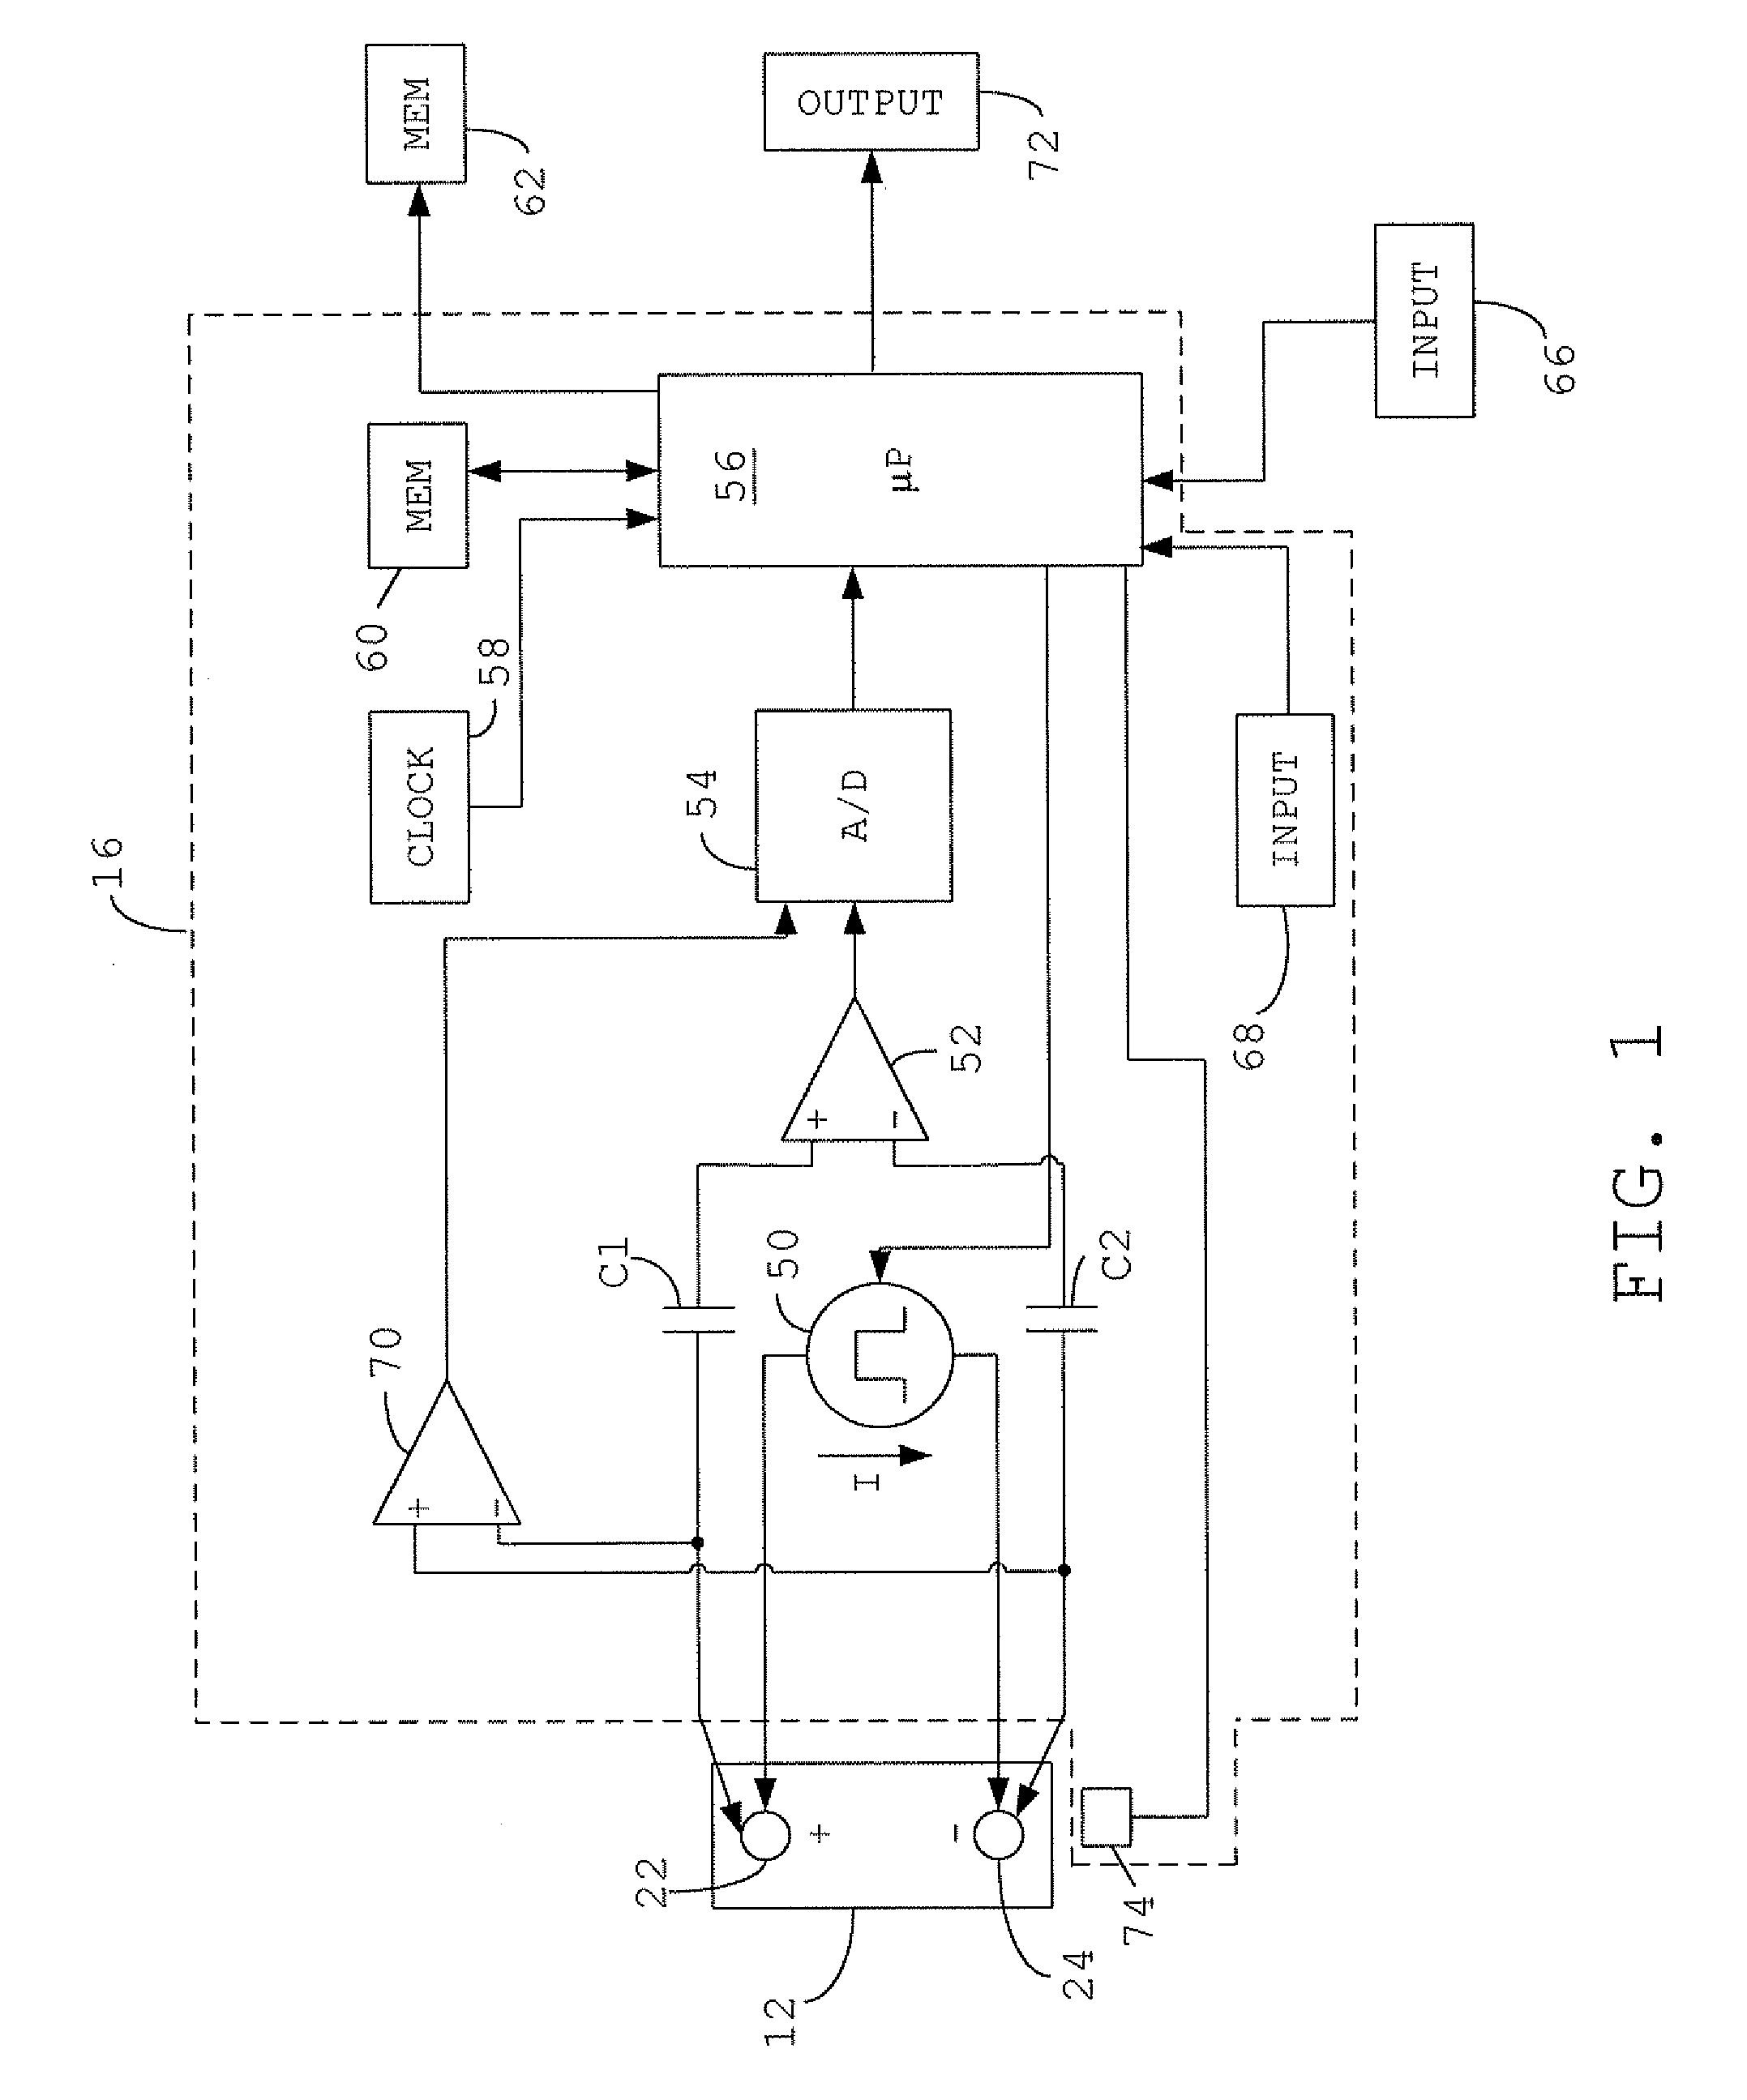 Electronic battery tester configured to predict a load test result based on open circuit voltage, temperature, cranking size rating, and a dynamic parameter